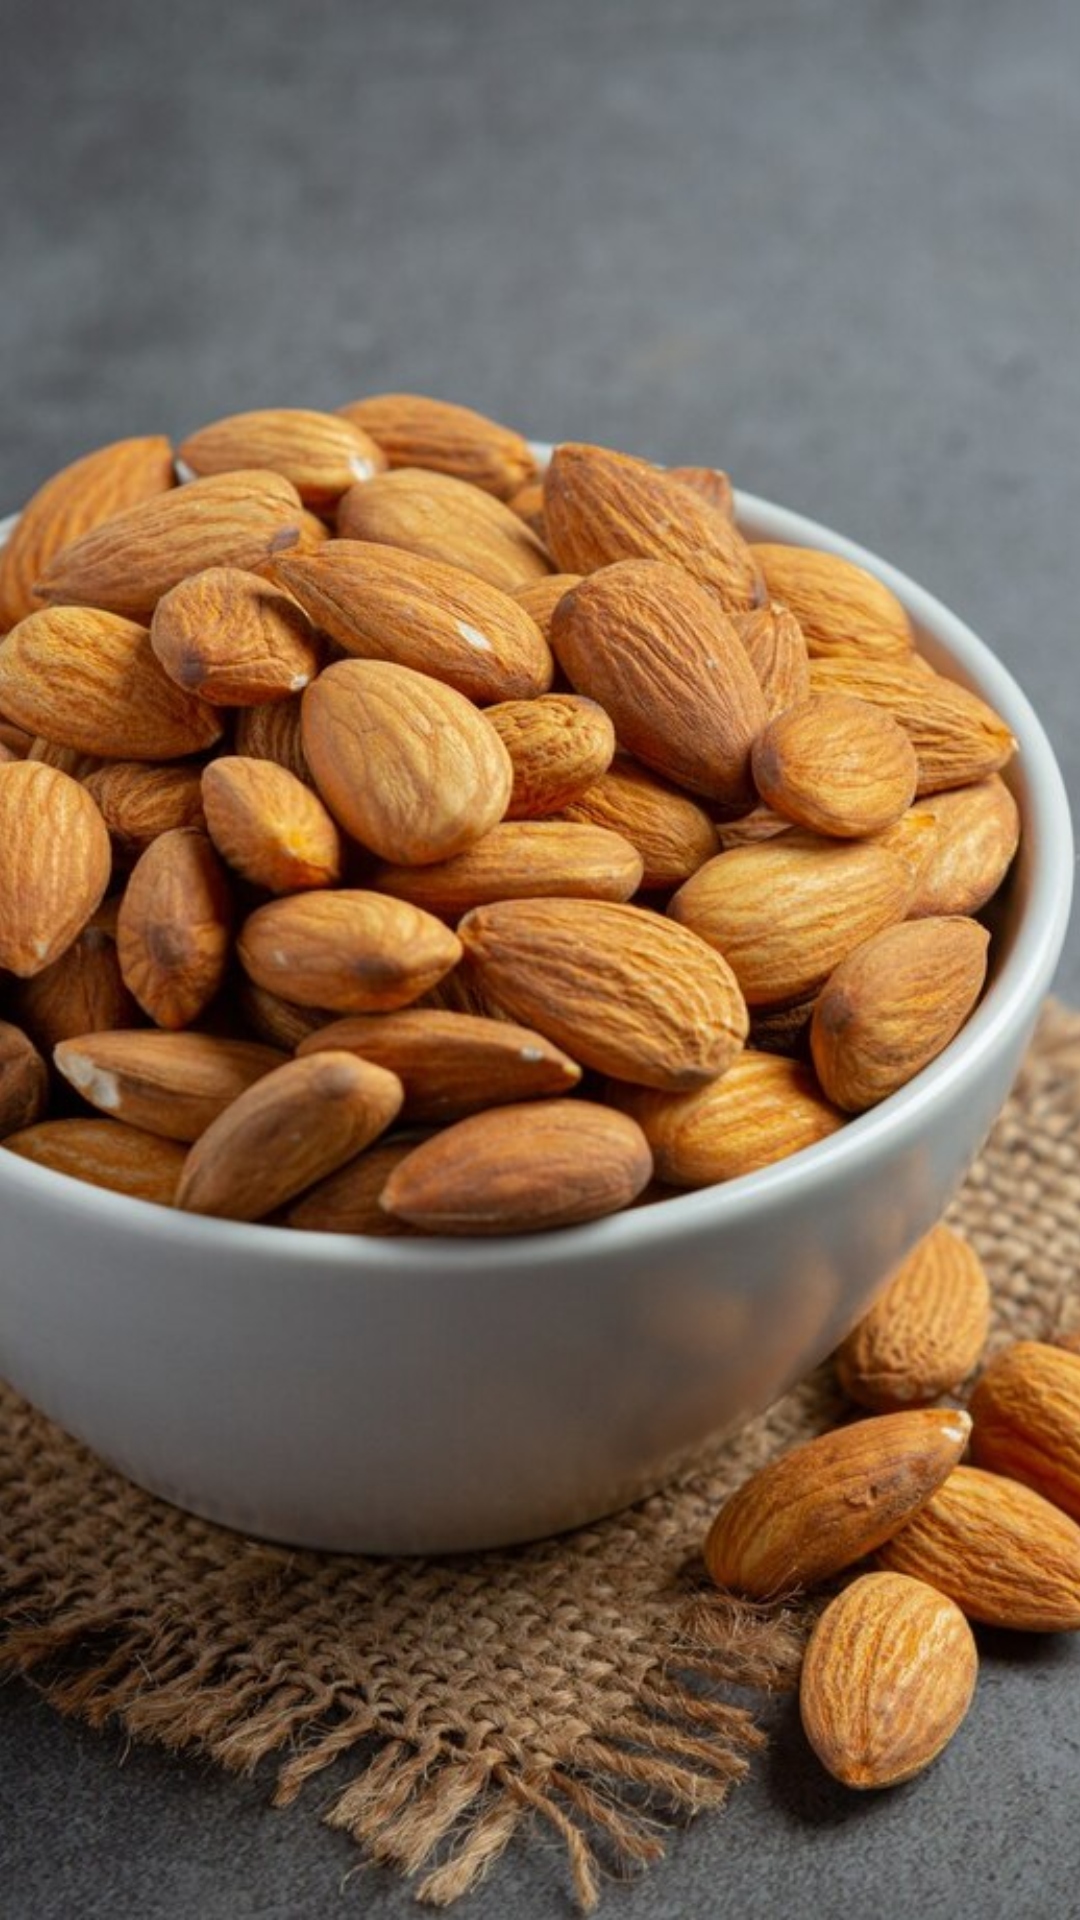 Inexpensive Substitutes of Almonds 